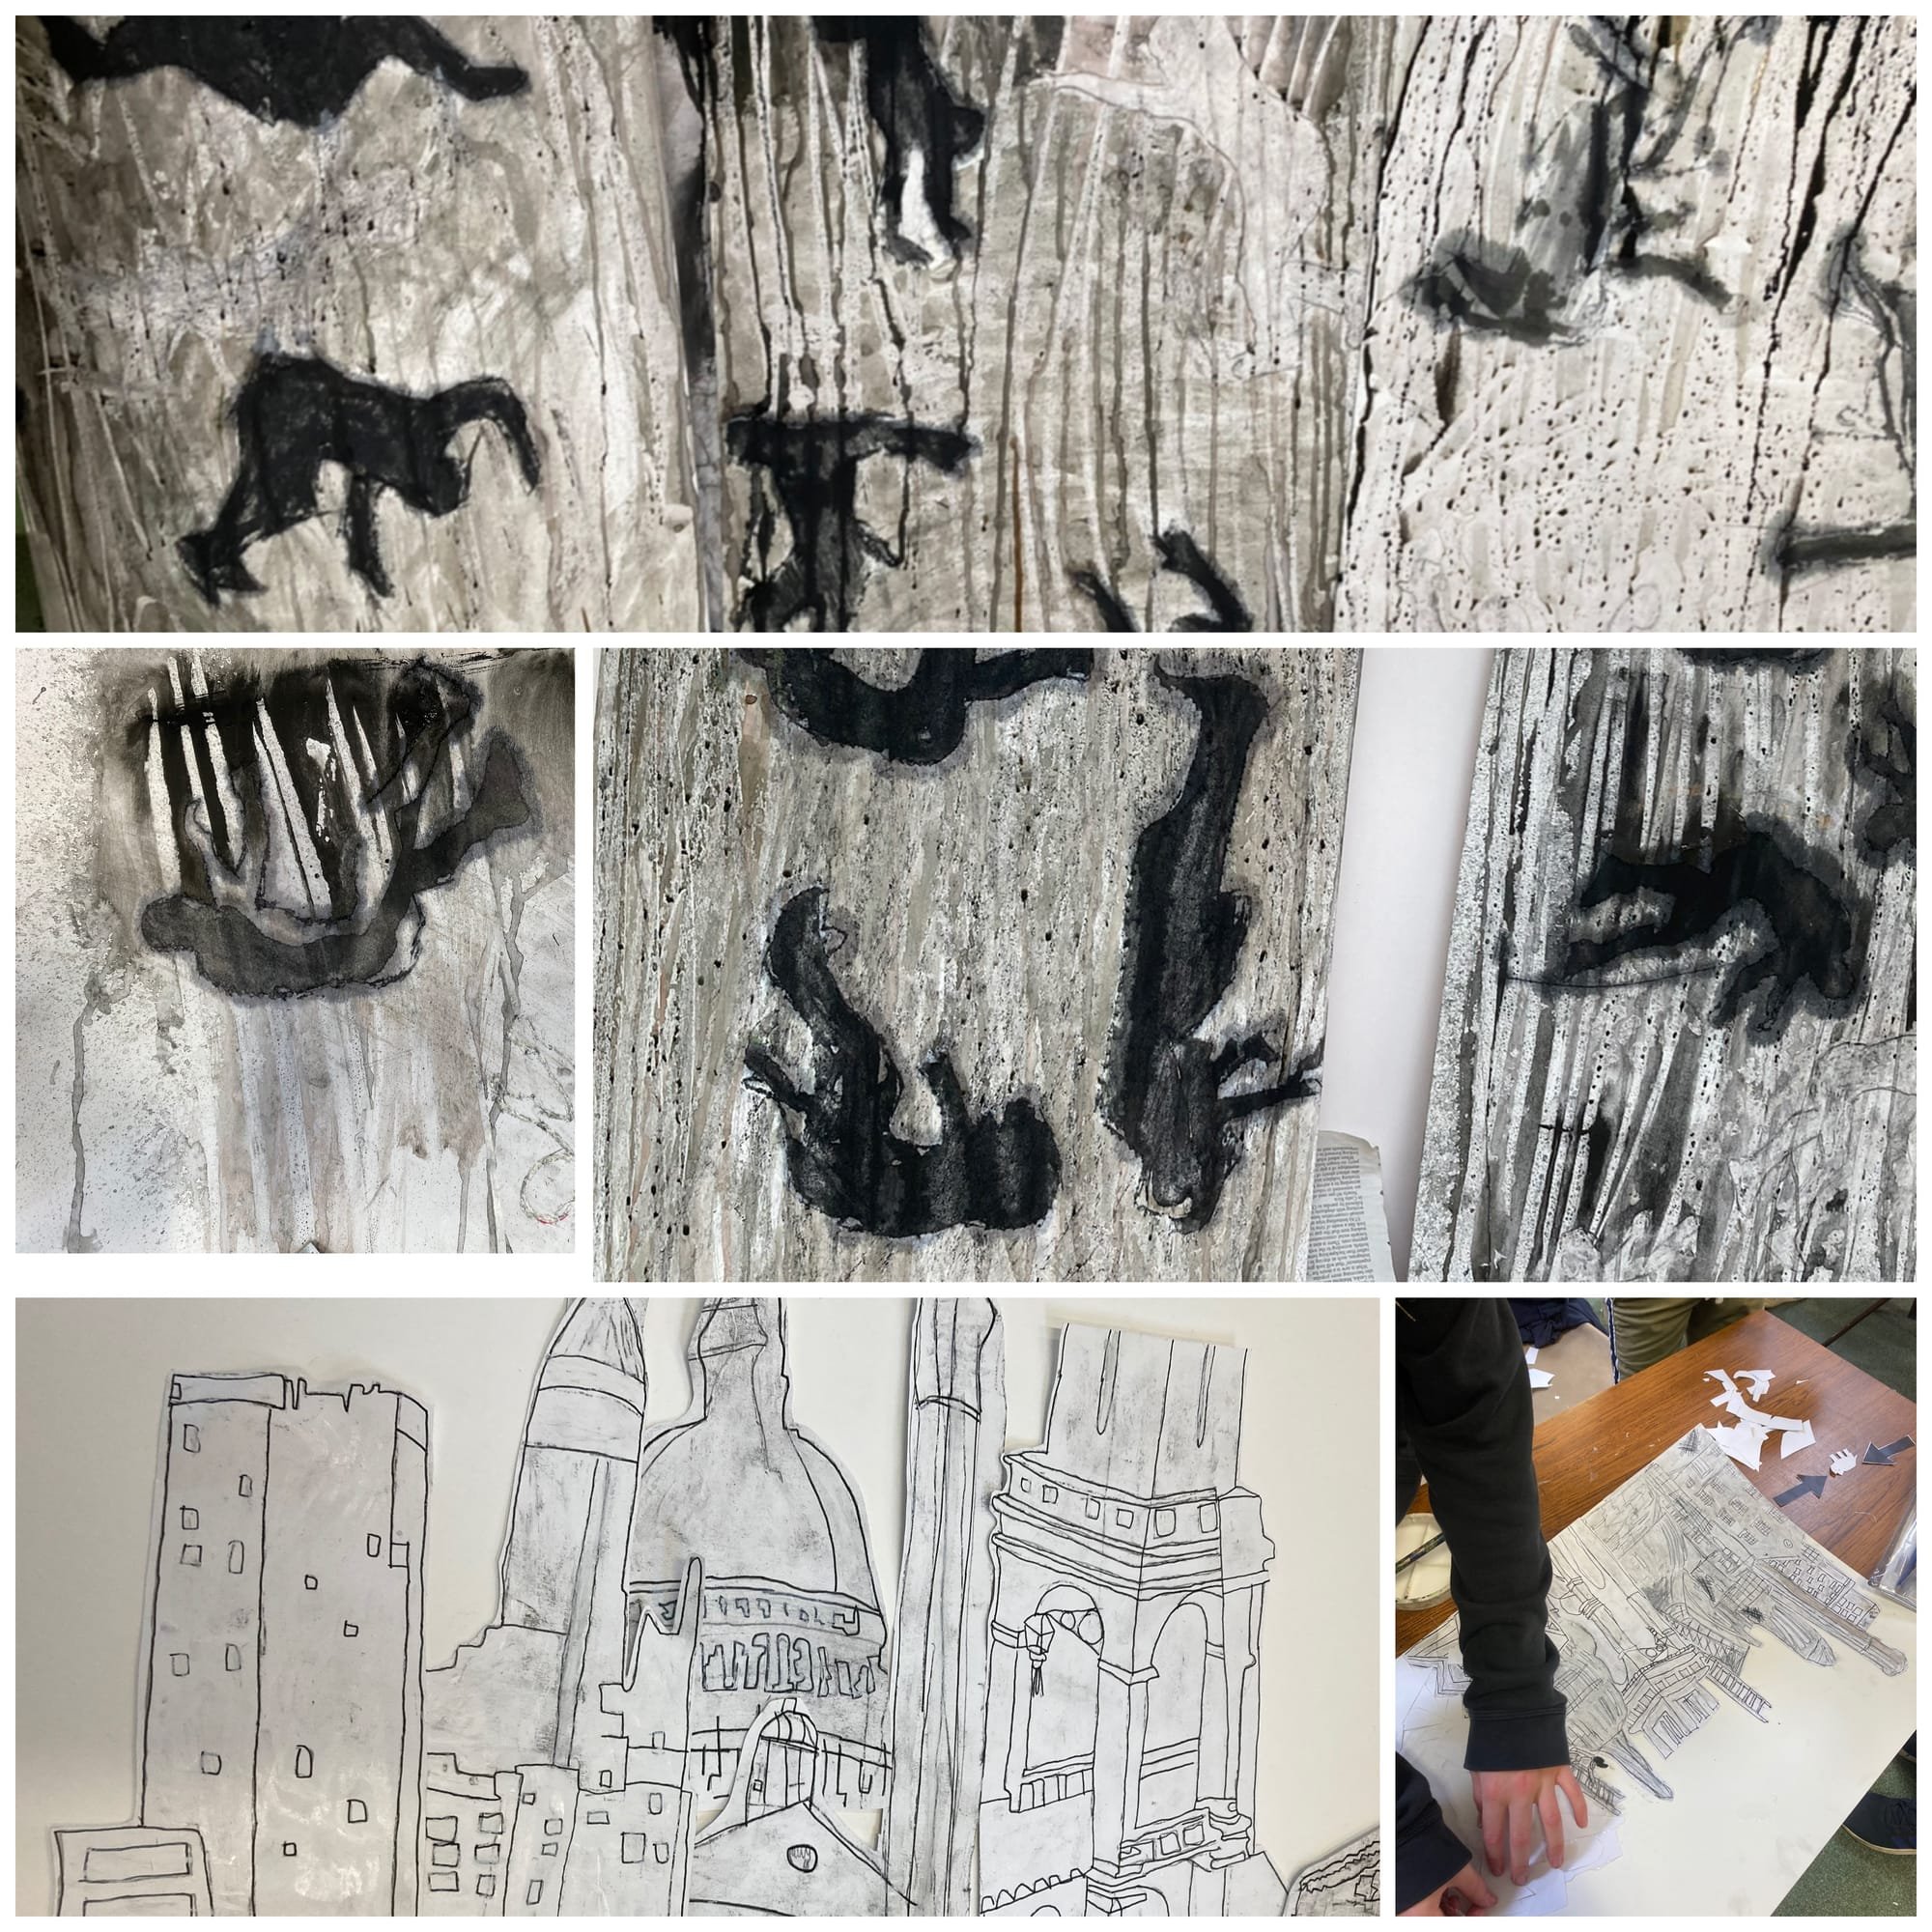 Figurative and architectural Workshop using Black and white methods. y5